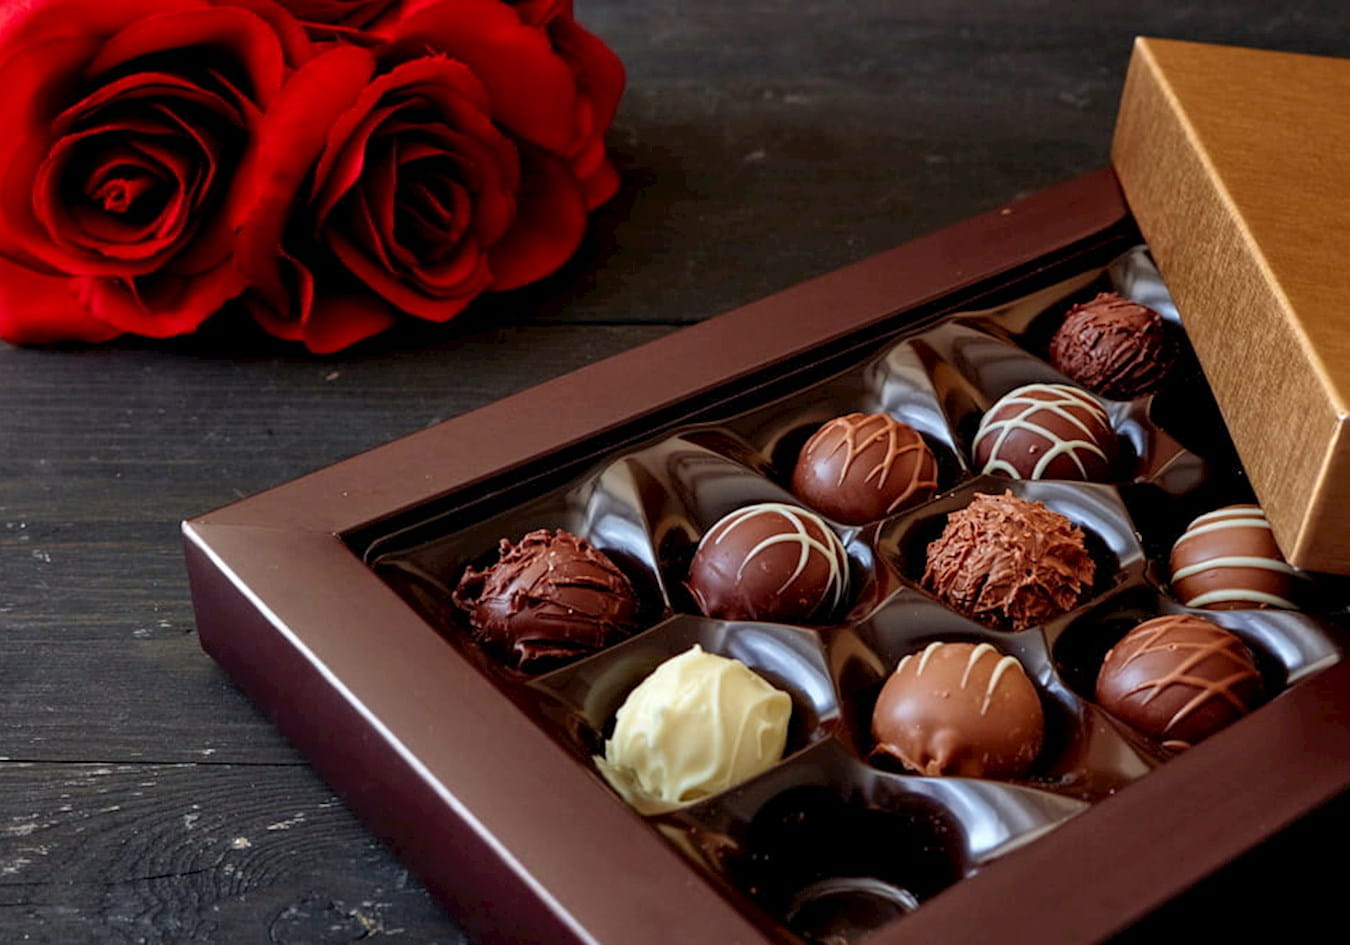 Photograph of chocolate box and roses